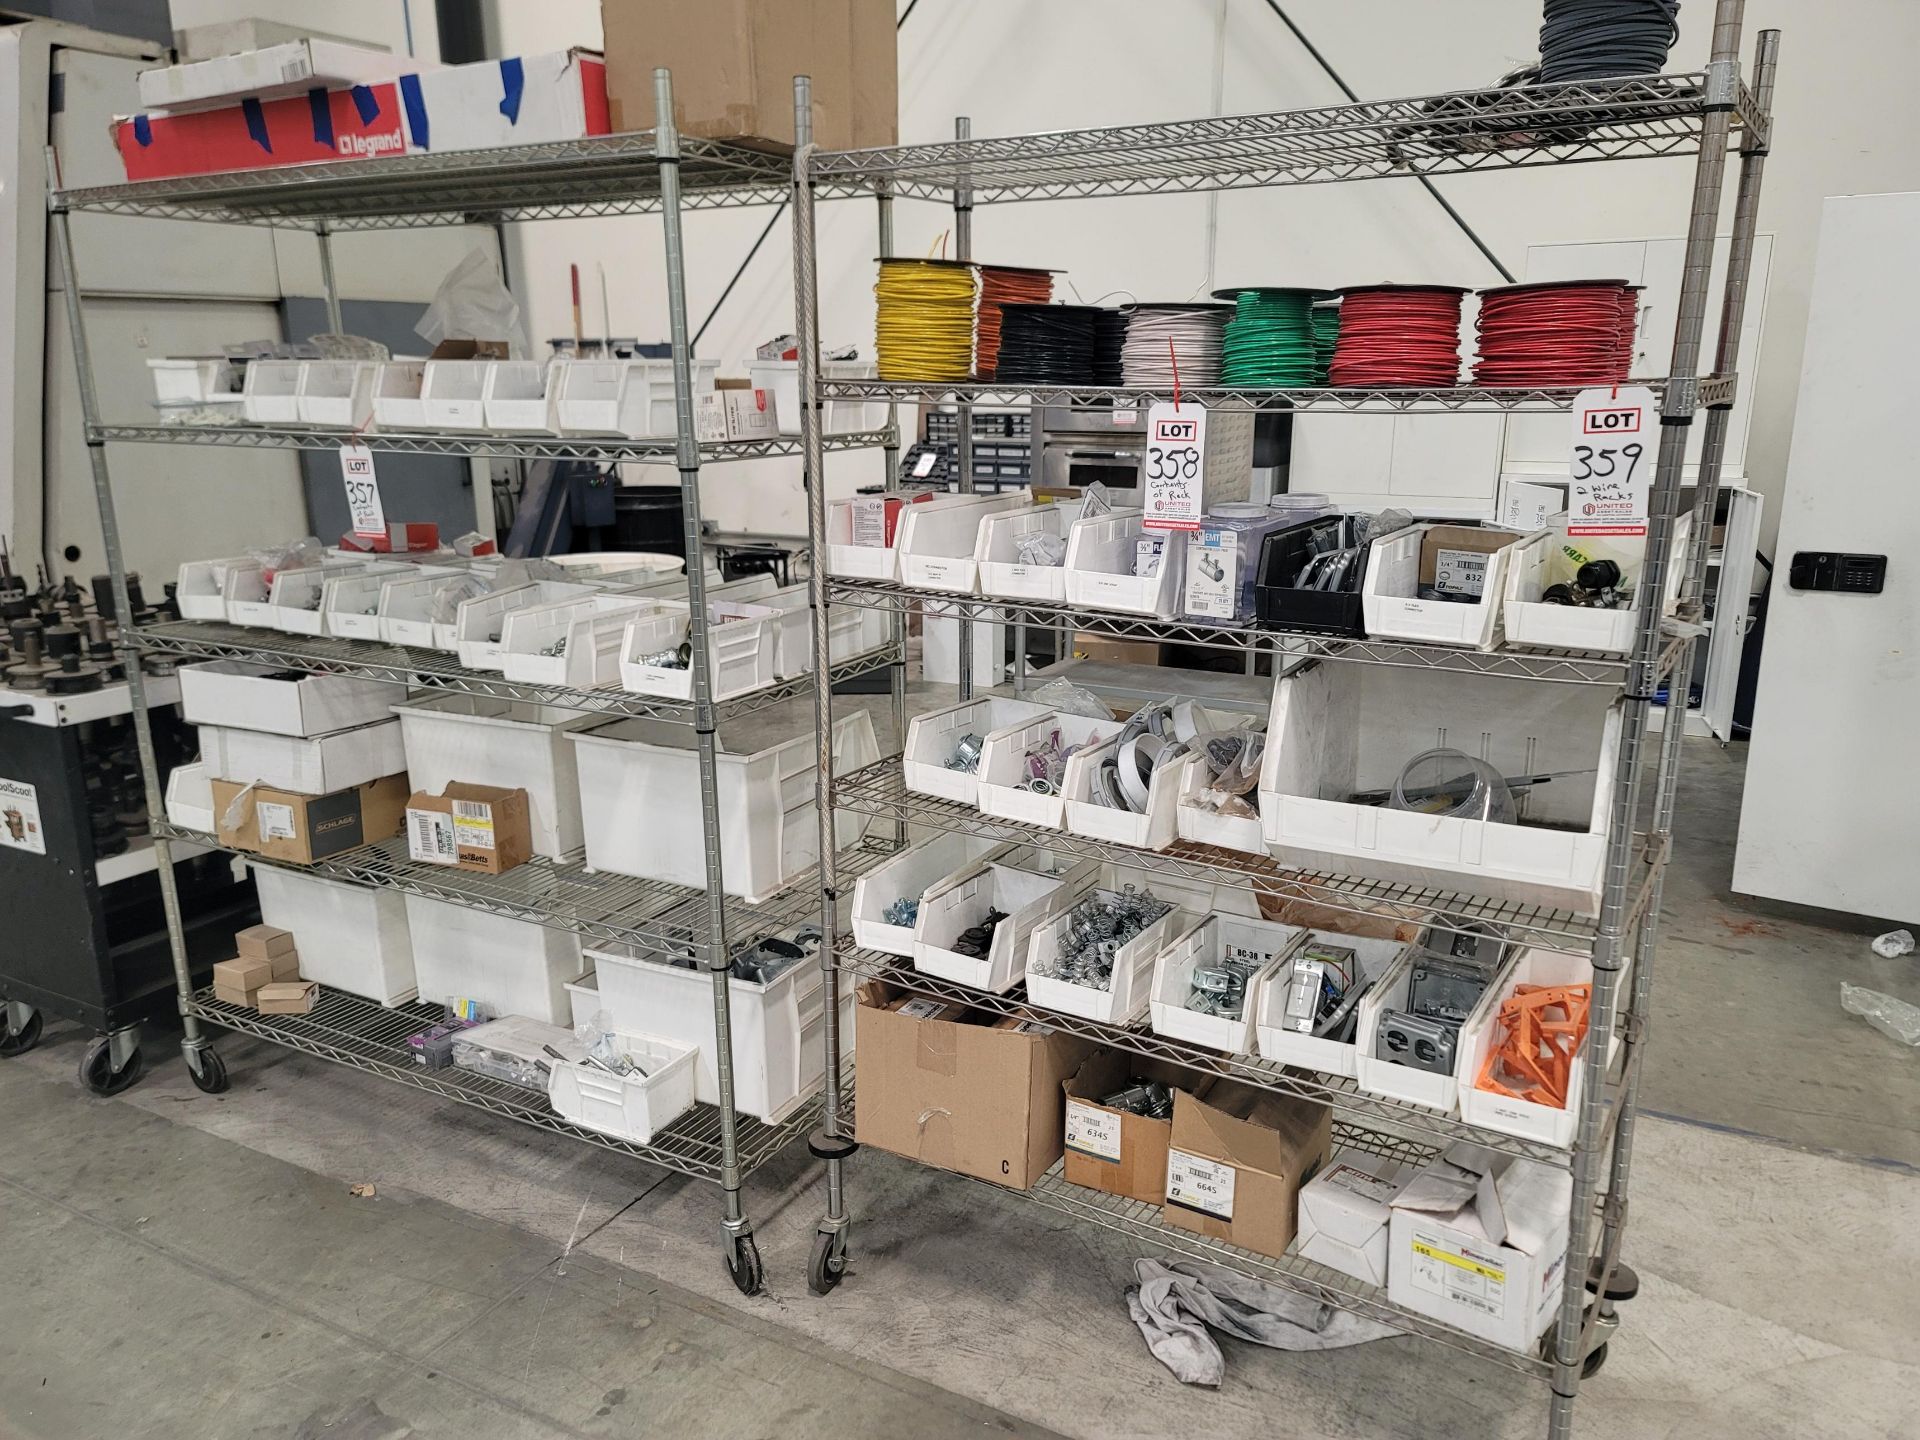 LOT - (2) WIRE SHELF UNITS, ON CASTERS, CONTENTS NOT INCLUDED, (DELAYED PICKUP UNTIL MONDAY, JULY